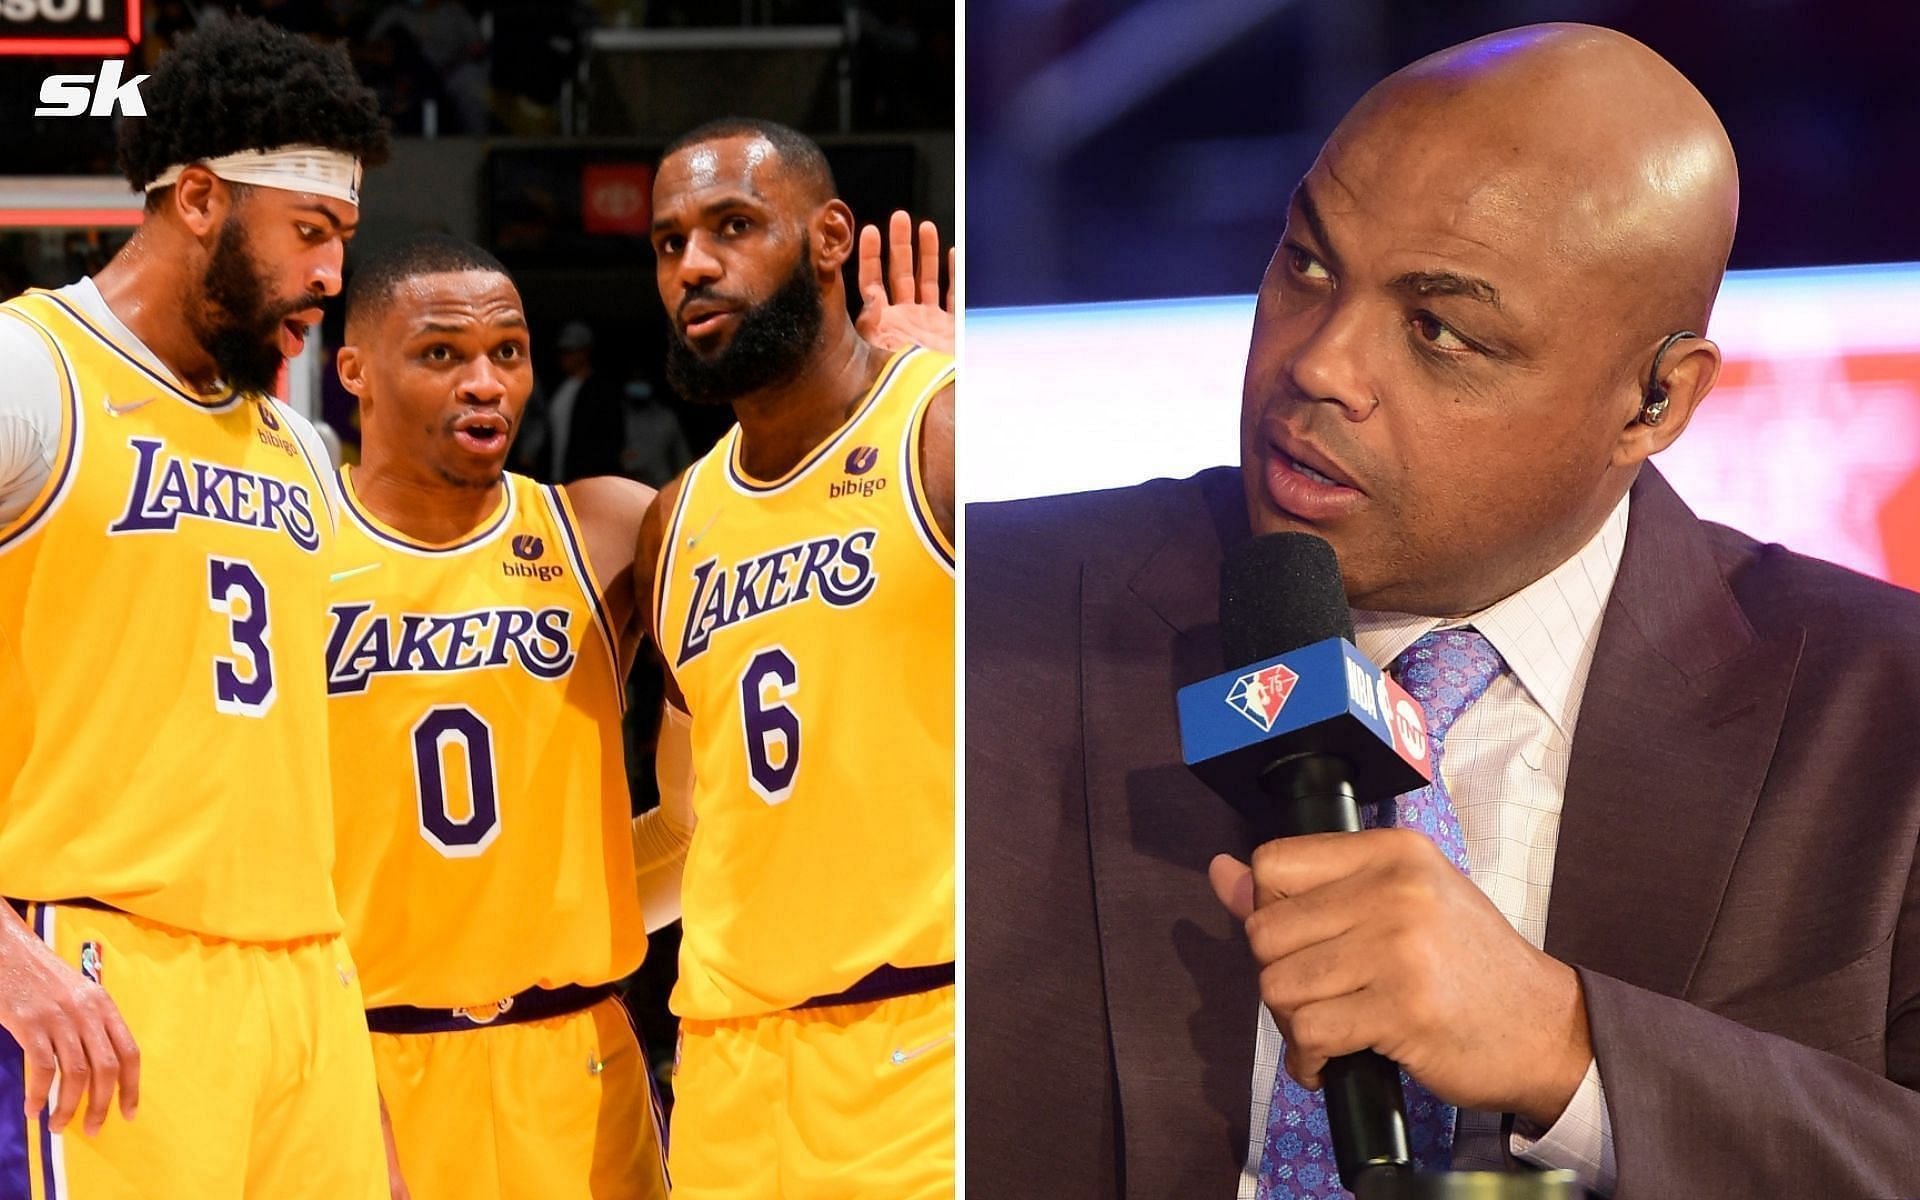 LA Lakers &quot;Big 3&quot; and NBA on TNT analyst Charles Barkley